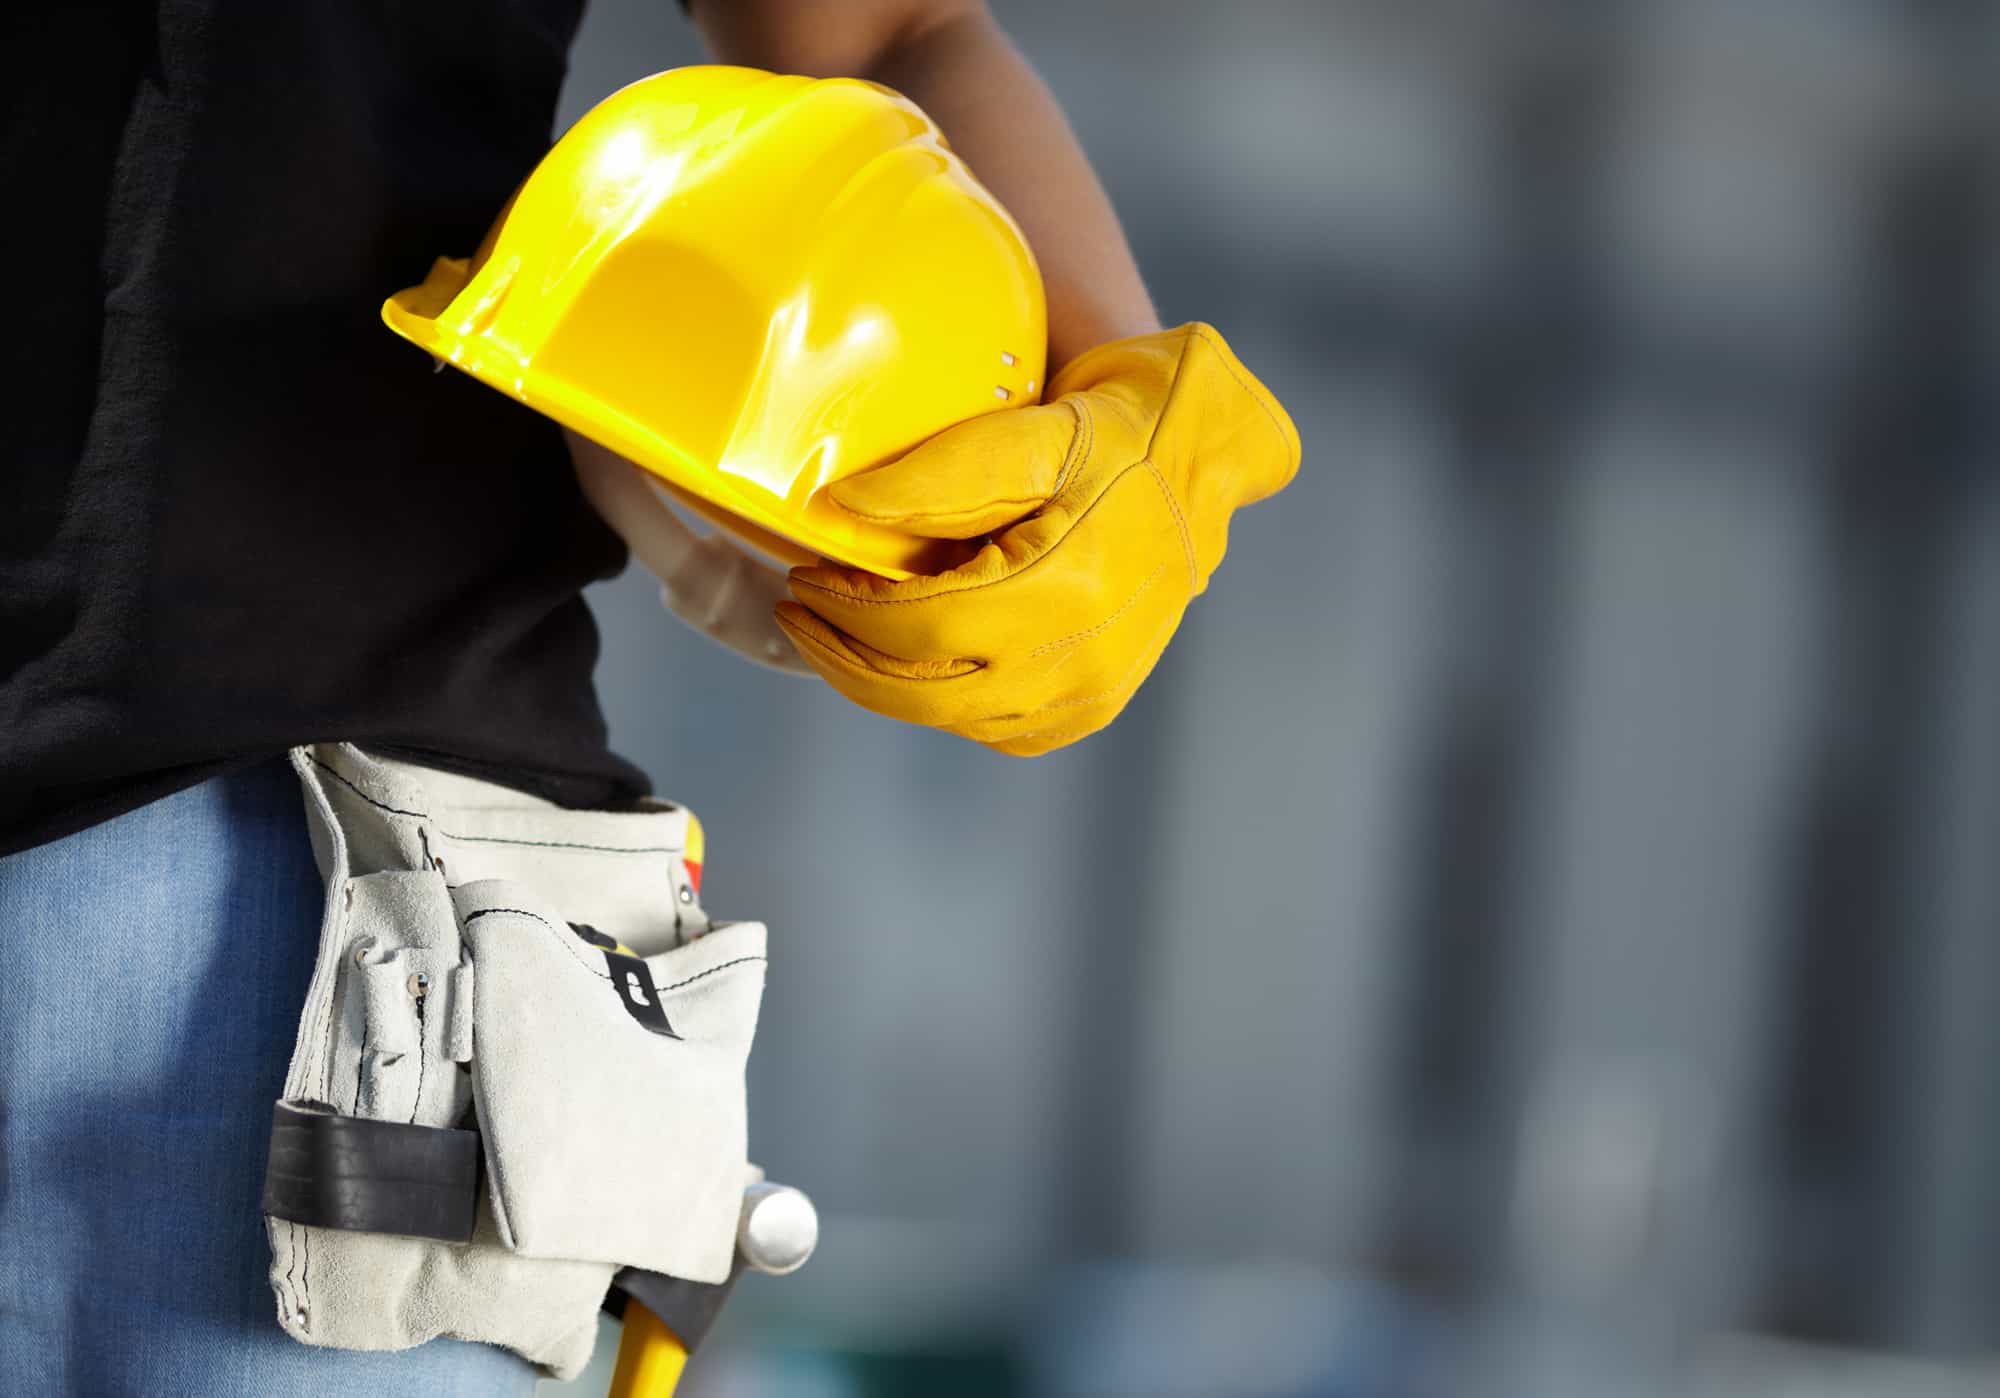 Close-up of a construction worker holding a yellow hard hat and gloves, with a tool belt around their waist, blurred background of a construction site in the construction industry.